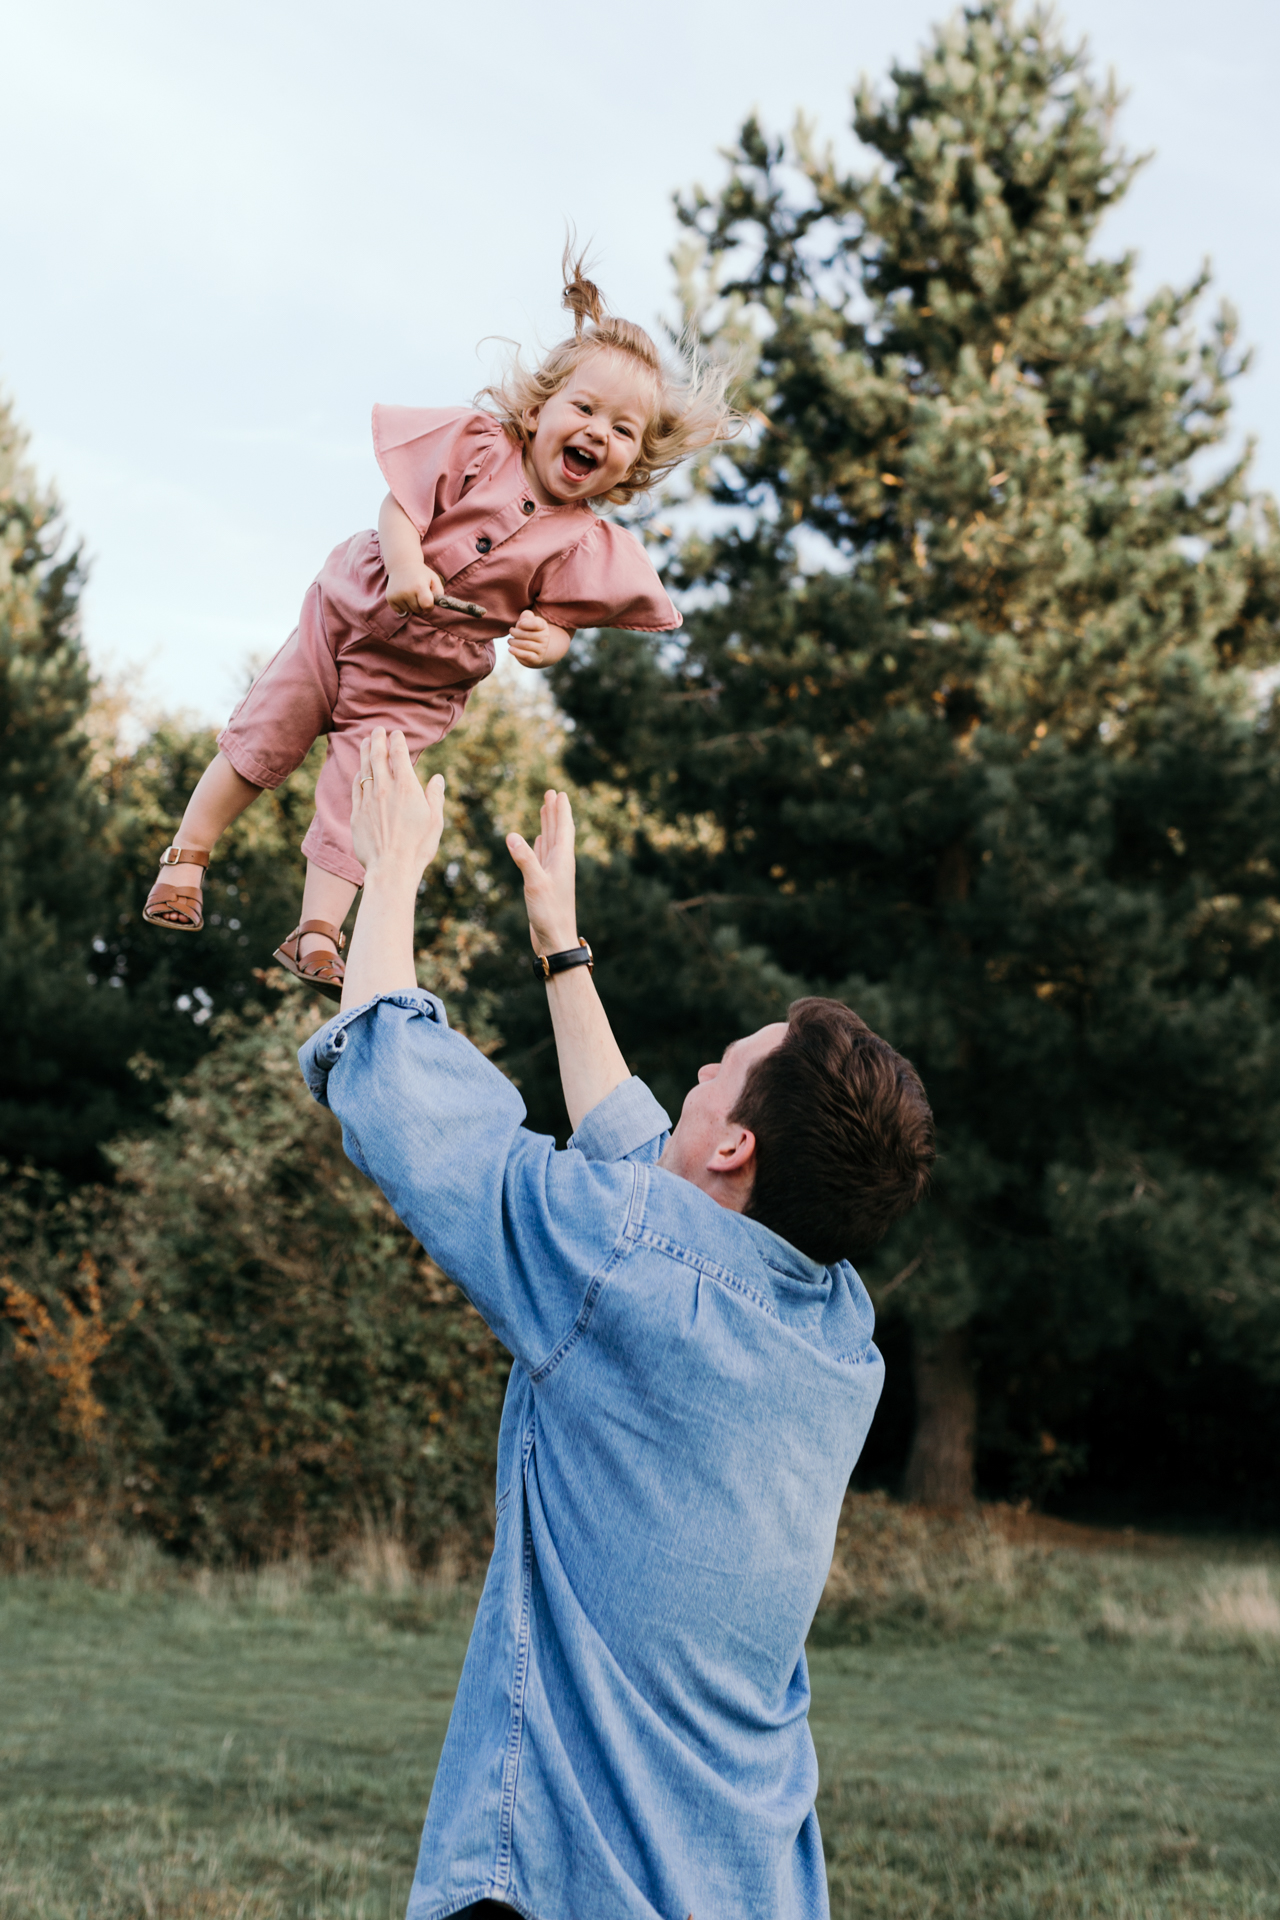 Dad throwing girl into the air. Girl is laughing. Family photoshoot in Basingstoke. Ewa Jones Photography